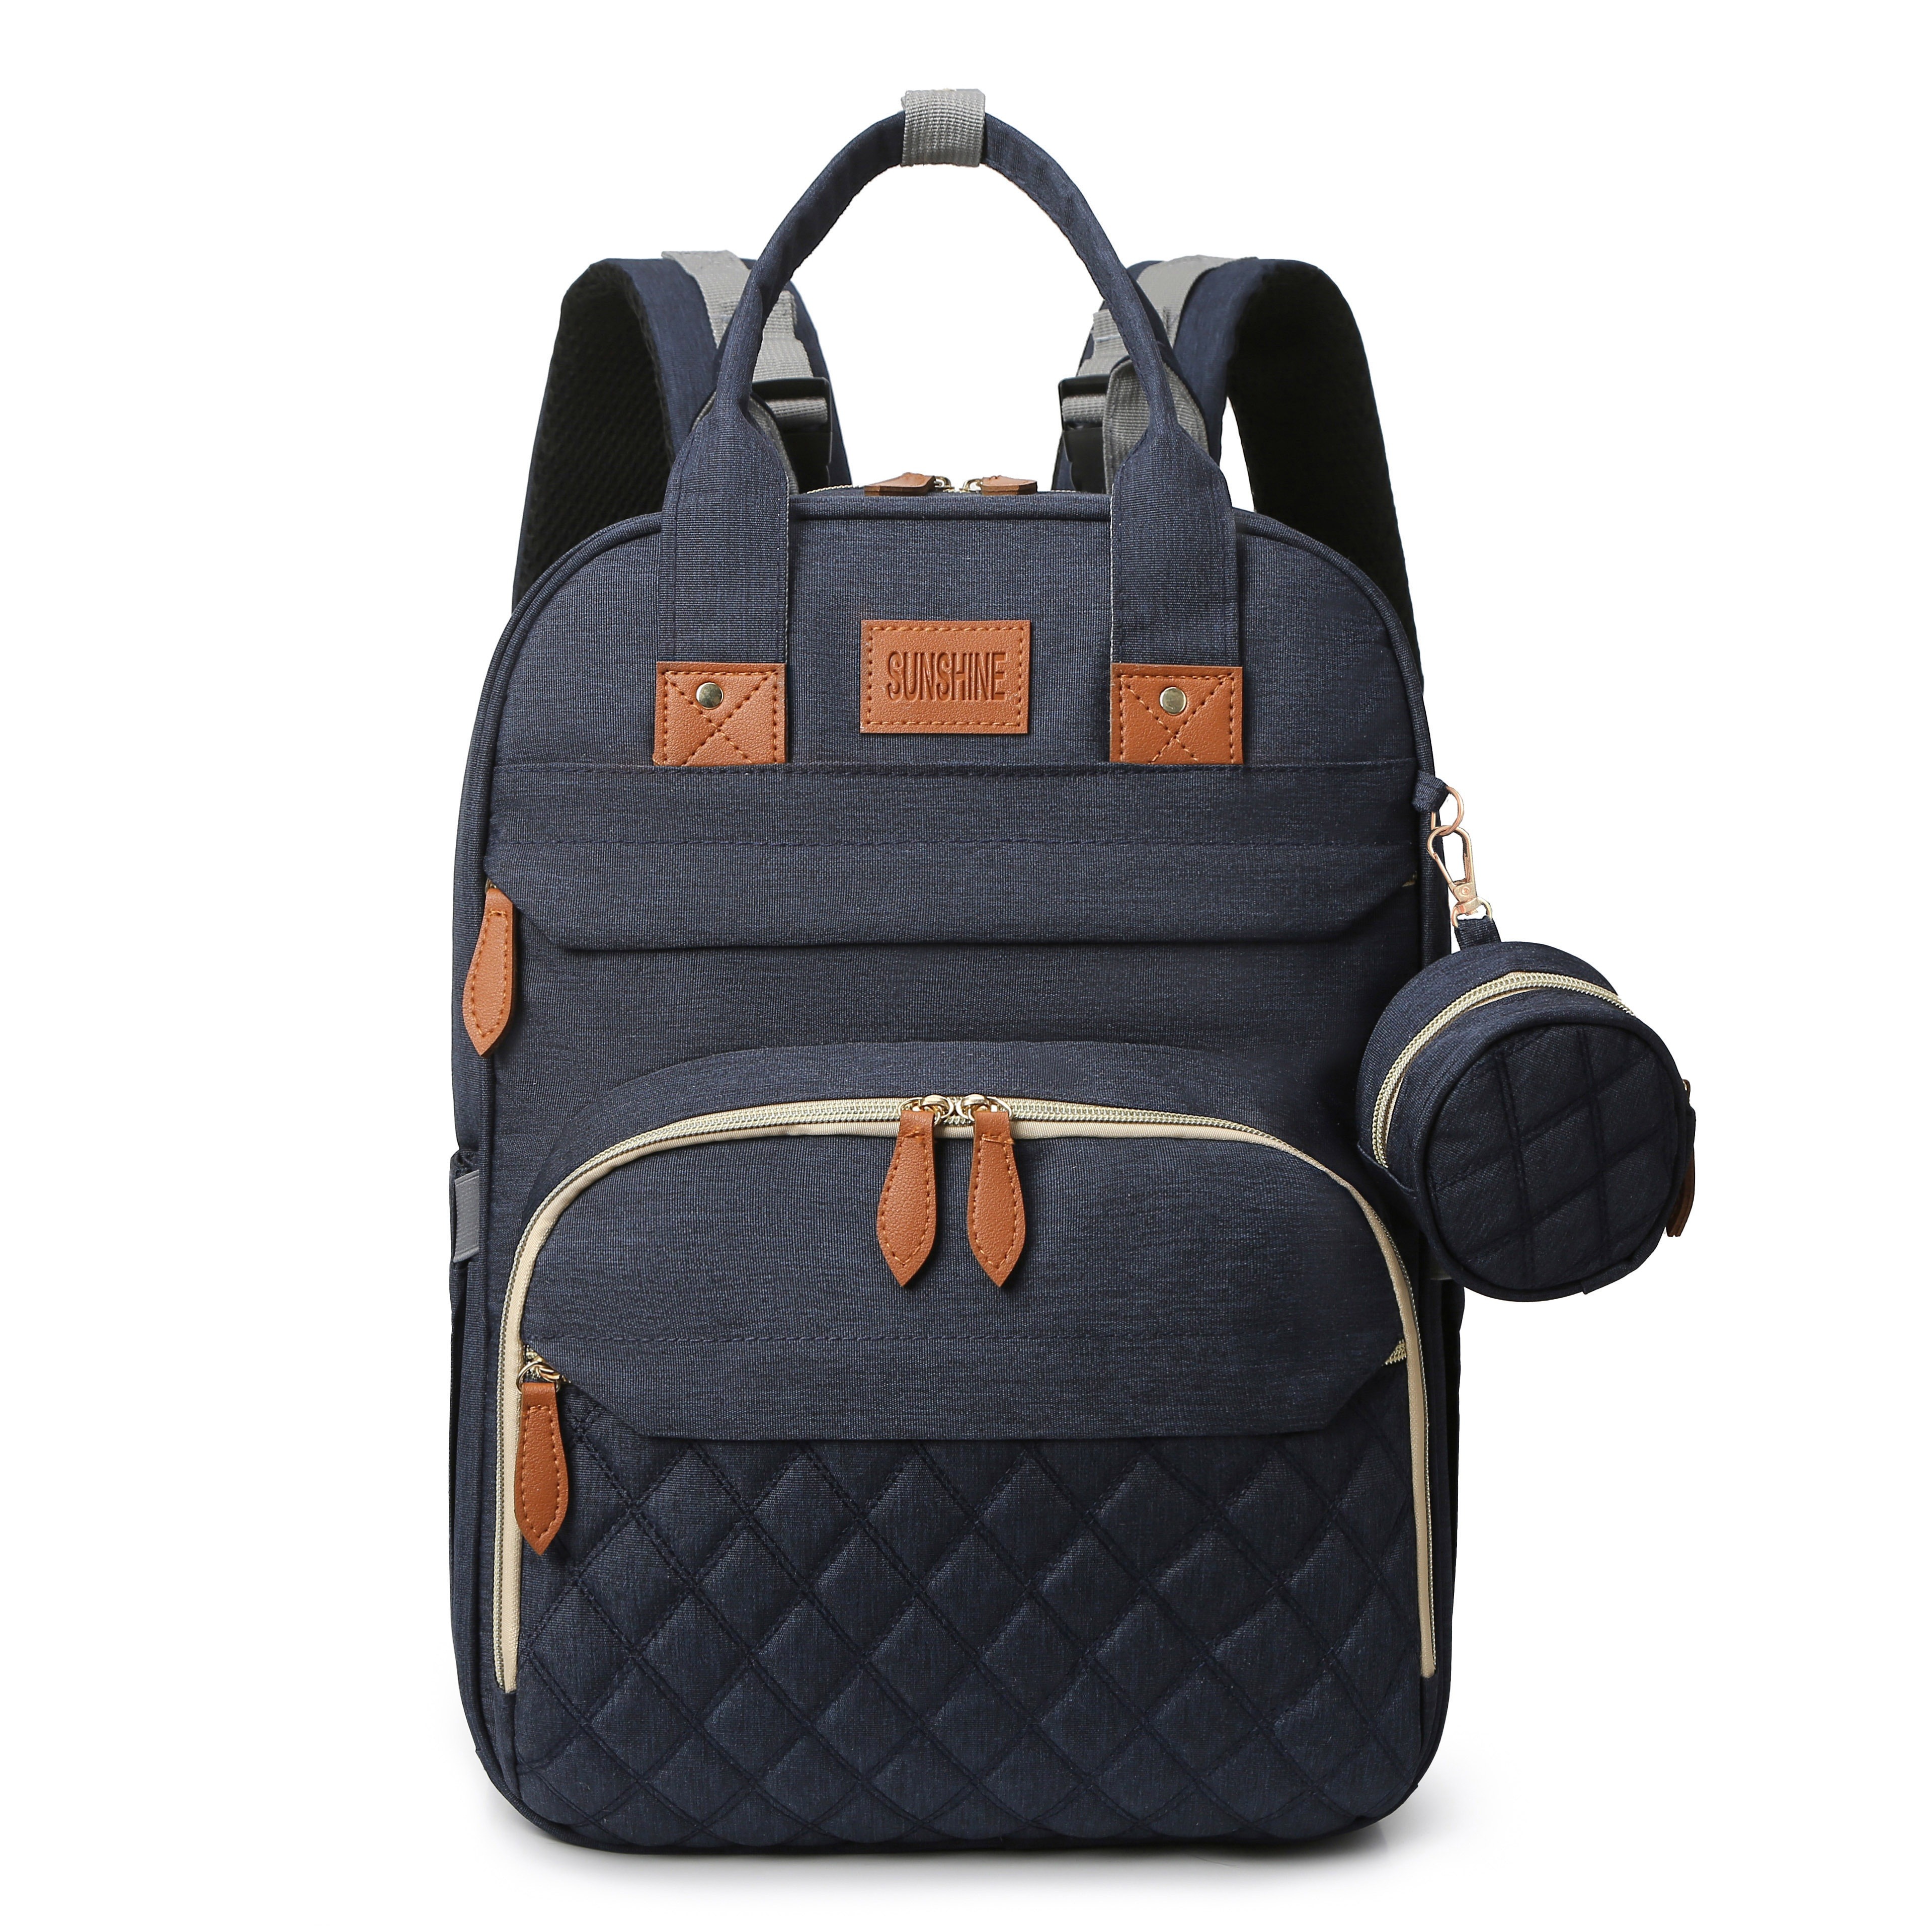 Best Diaper Bag Backpack, Leather Moms & Dads Diaper Bag for Baby